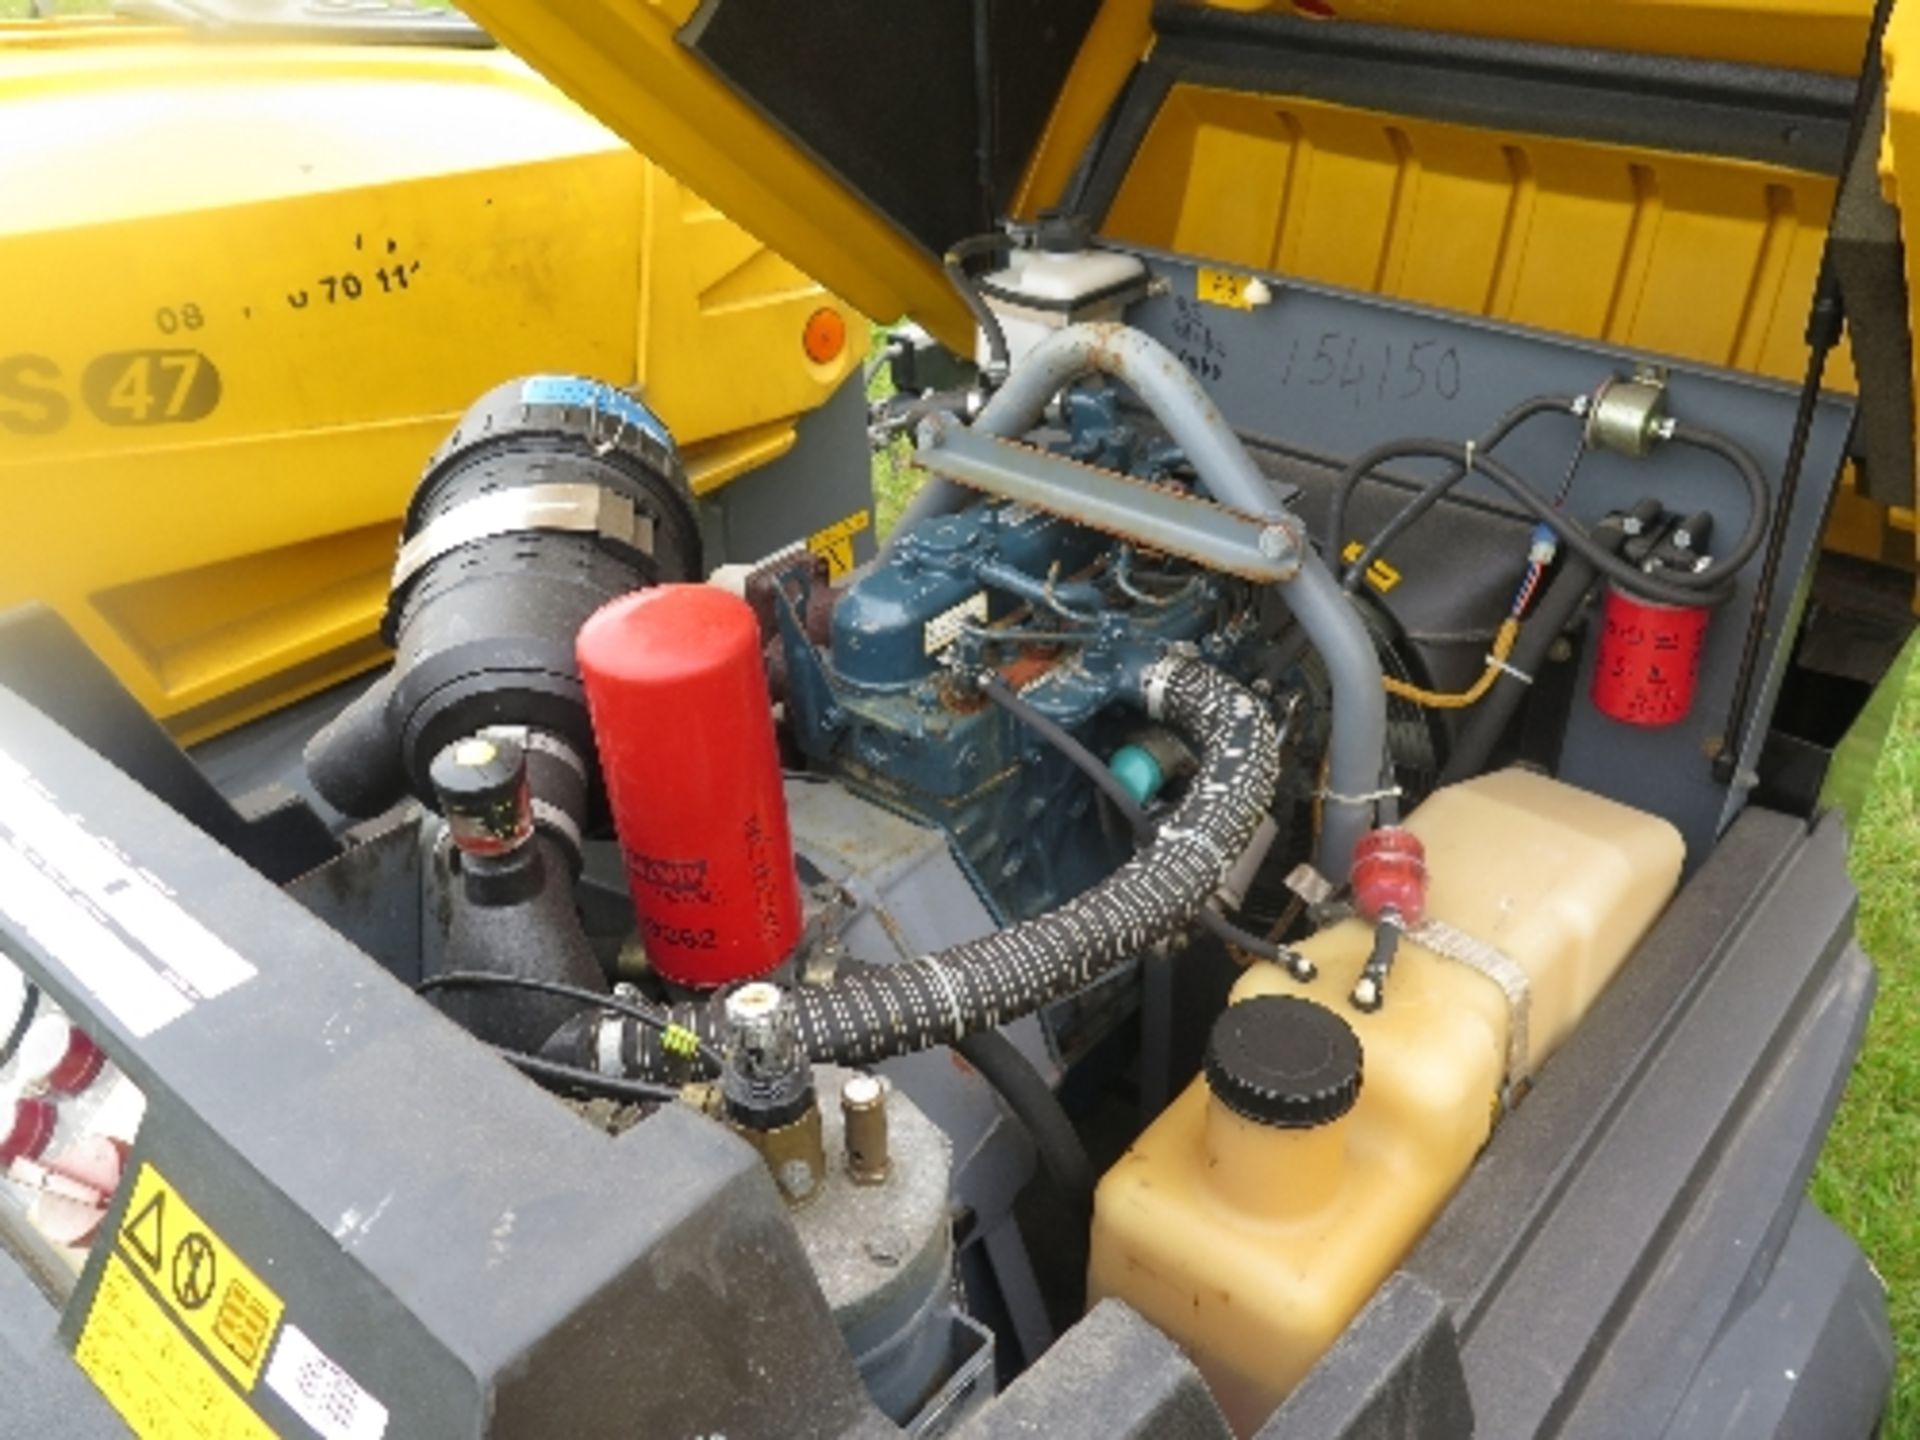 Atlas Copco XAS47 compressor 2007 154150
857 HOURS - KUBOTA POWER - RUNS AND MAKES AIR
ALL LOTS - Image 4 of 5